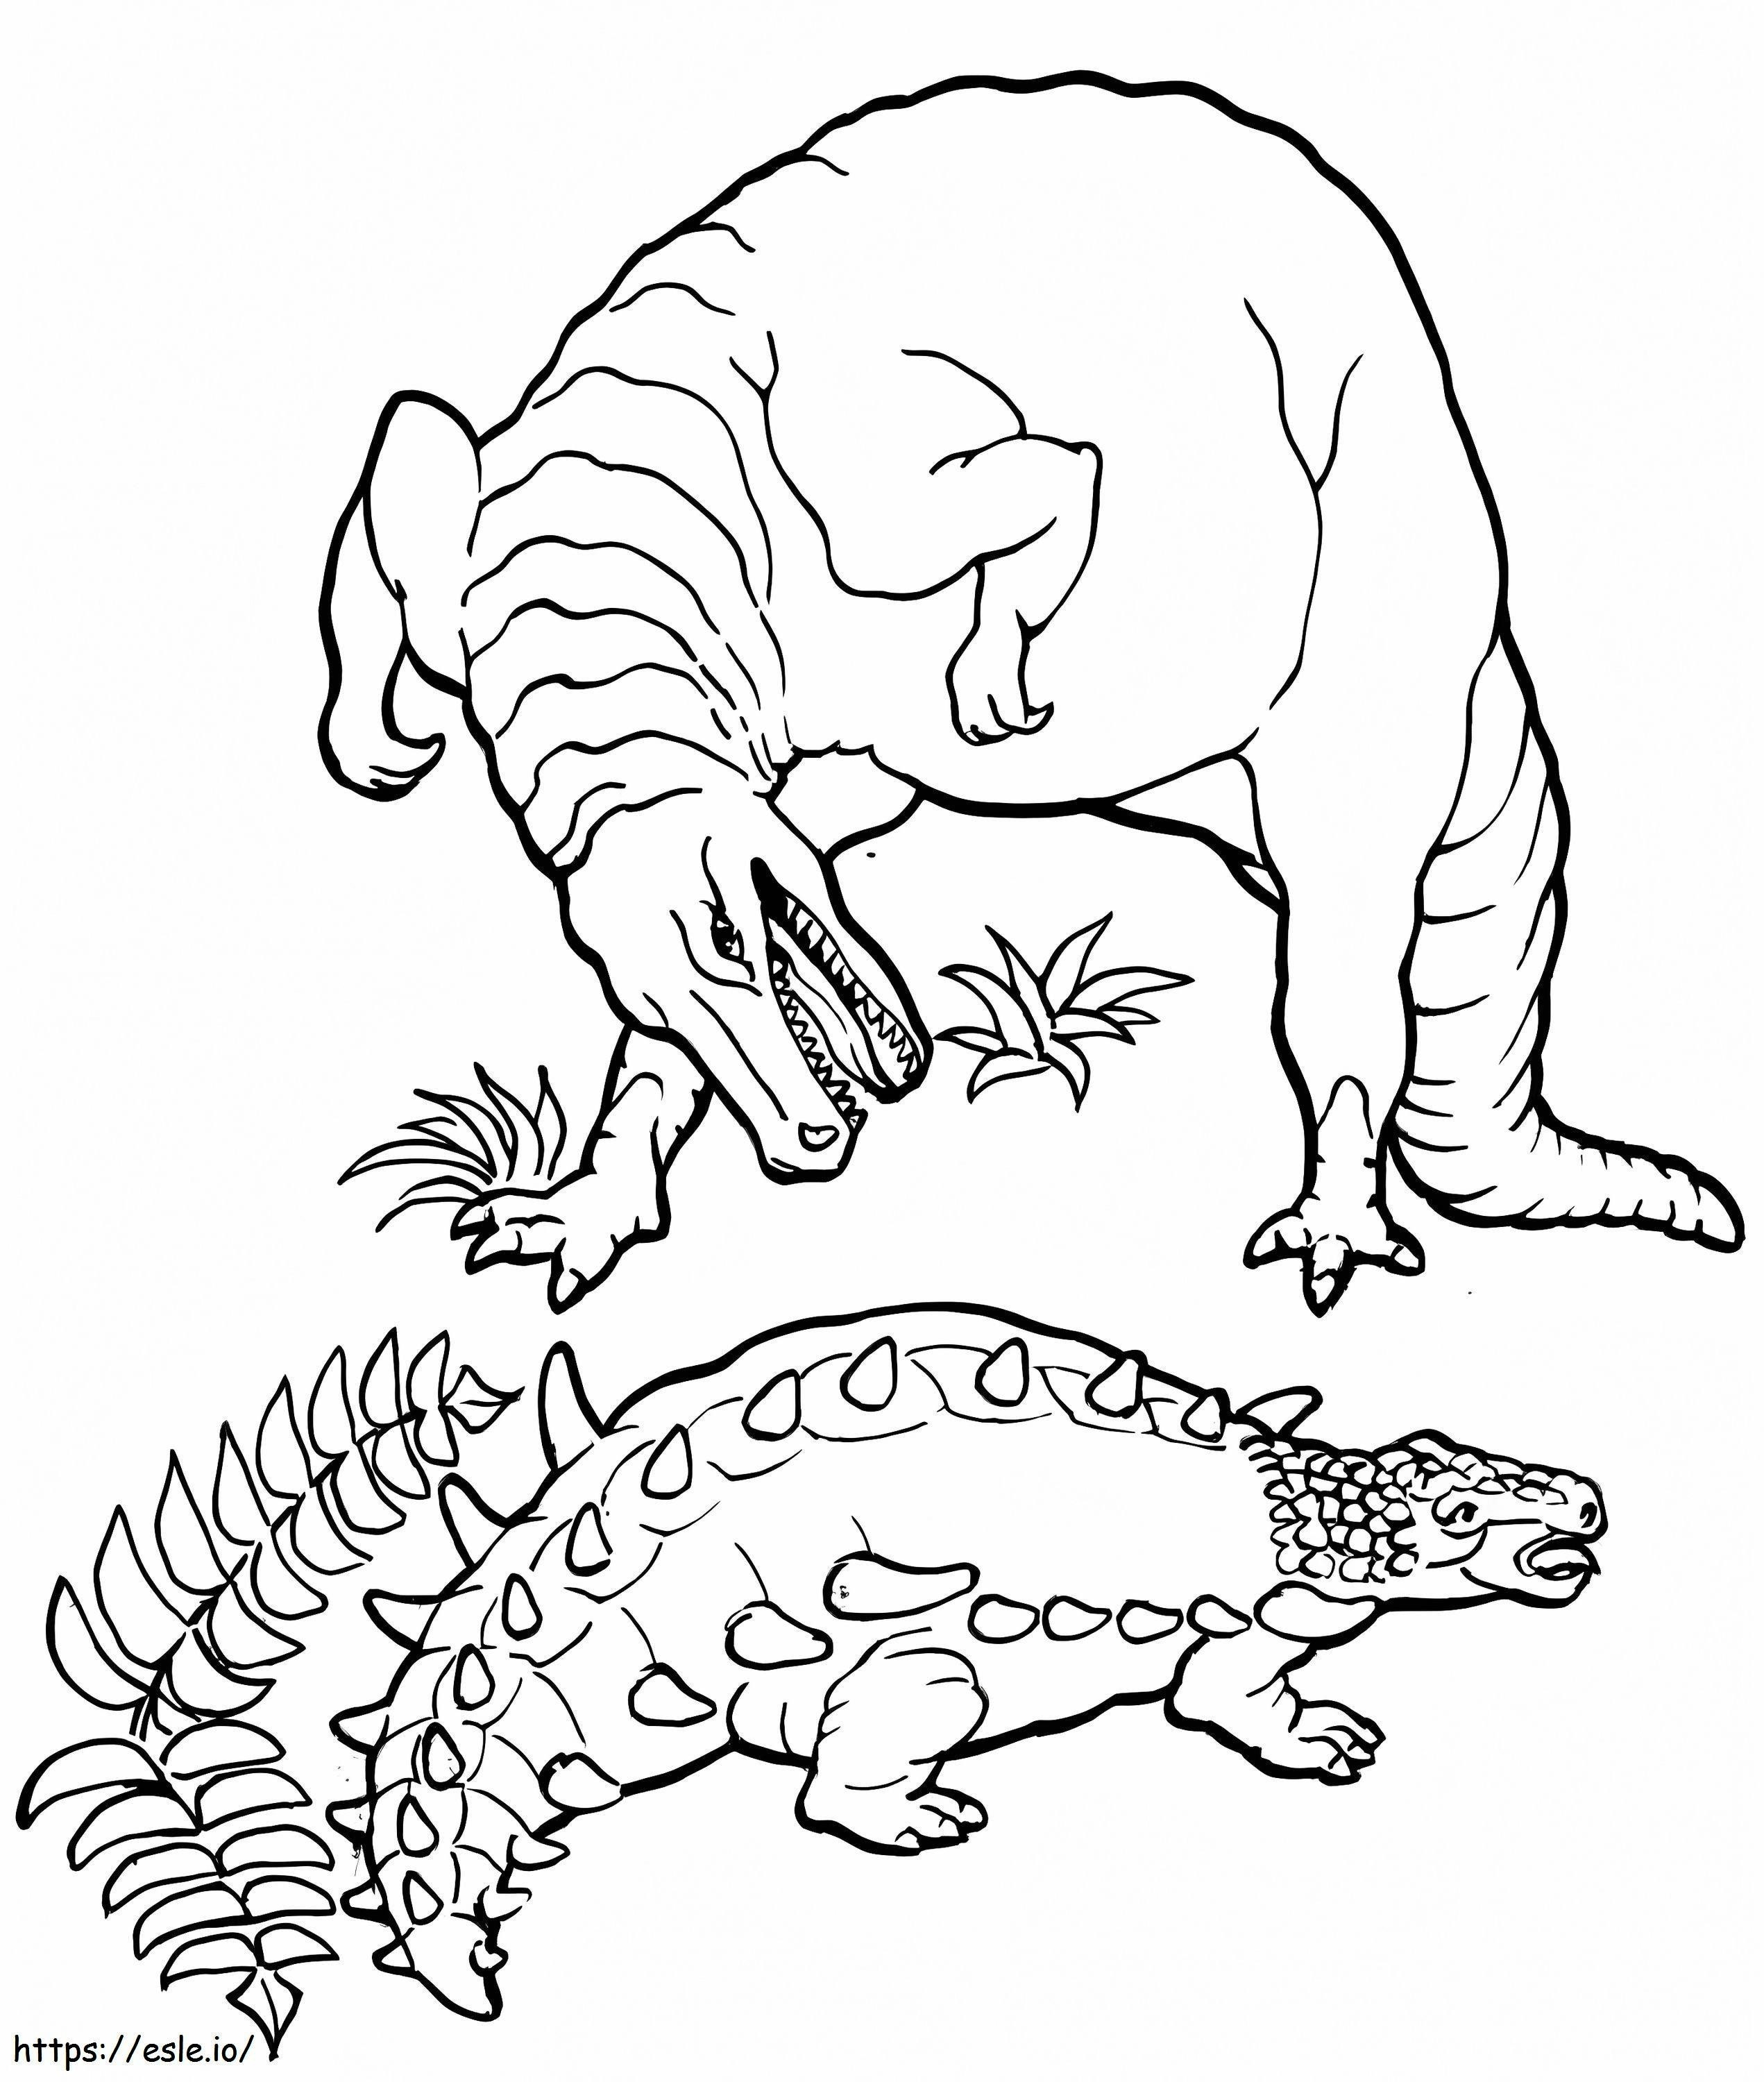 Ankylosaurus And T Rex coloring page